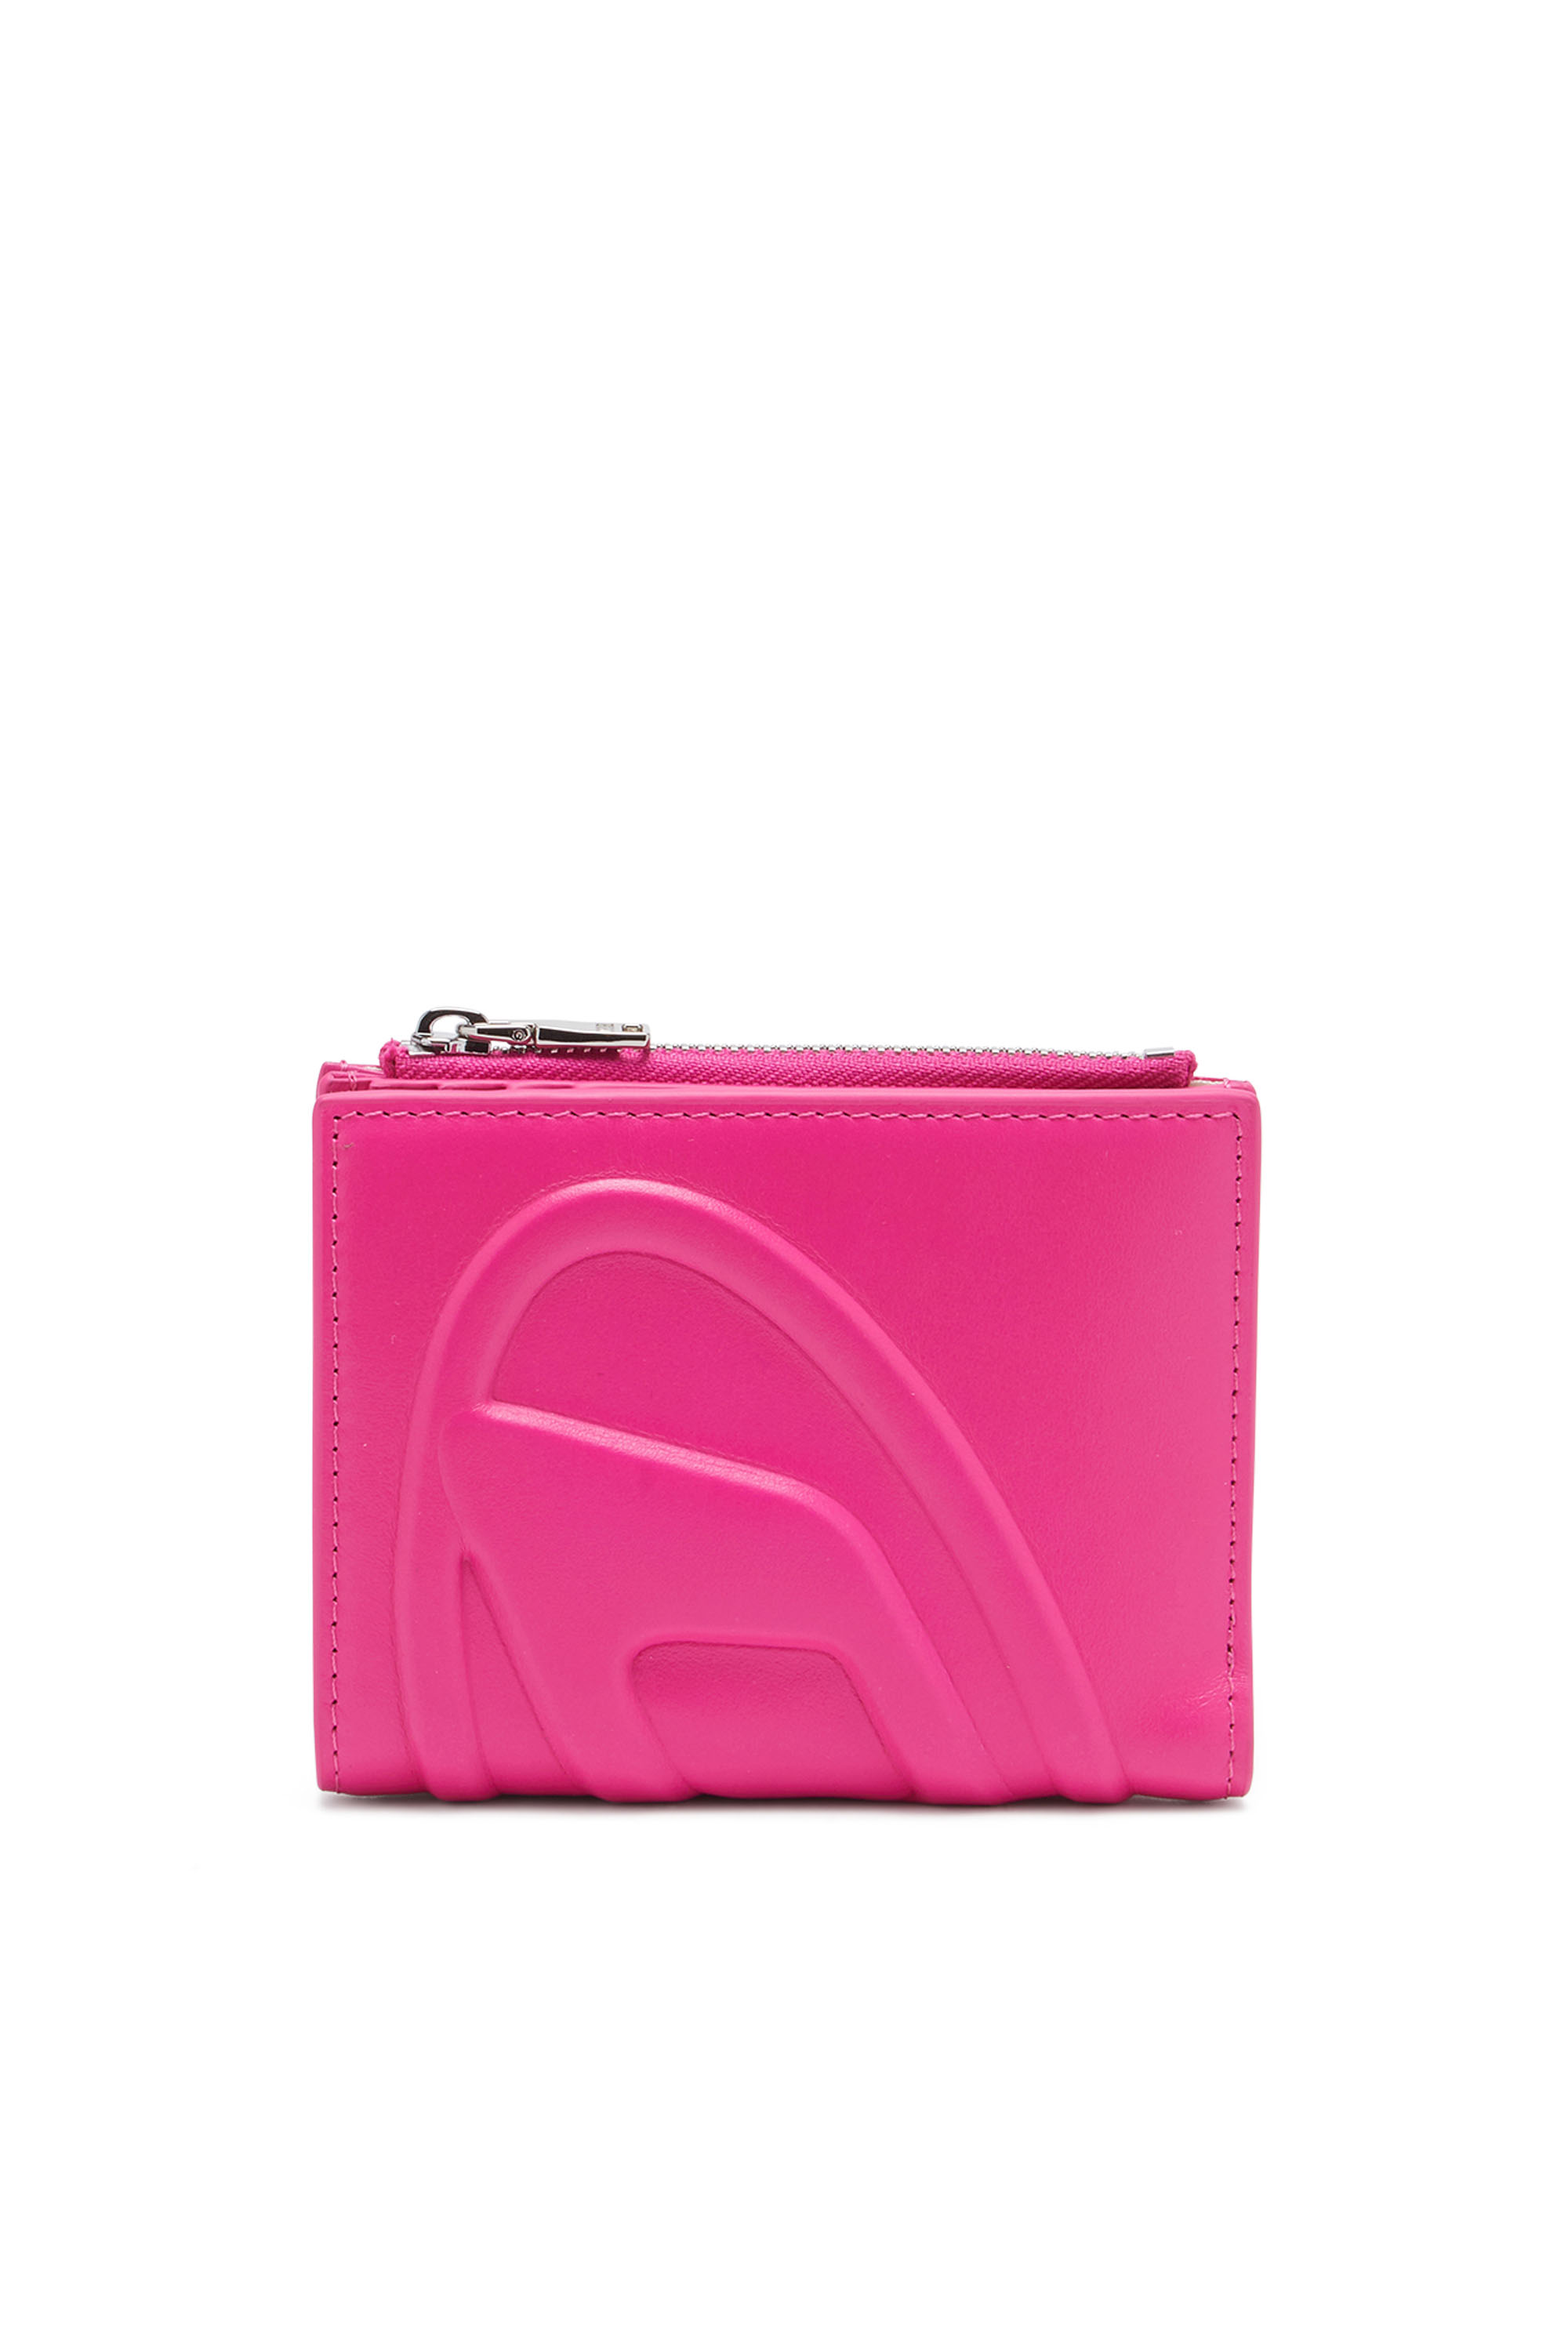 Diesel - Small leather wallet with embossed logo - Small Wallets - Woman - Pink